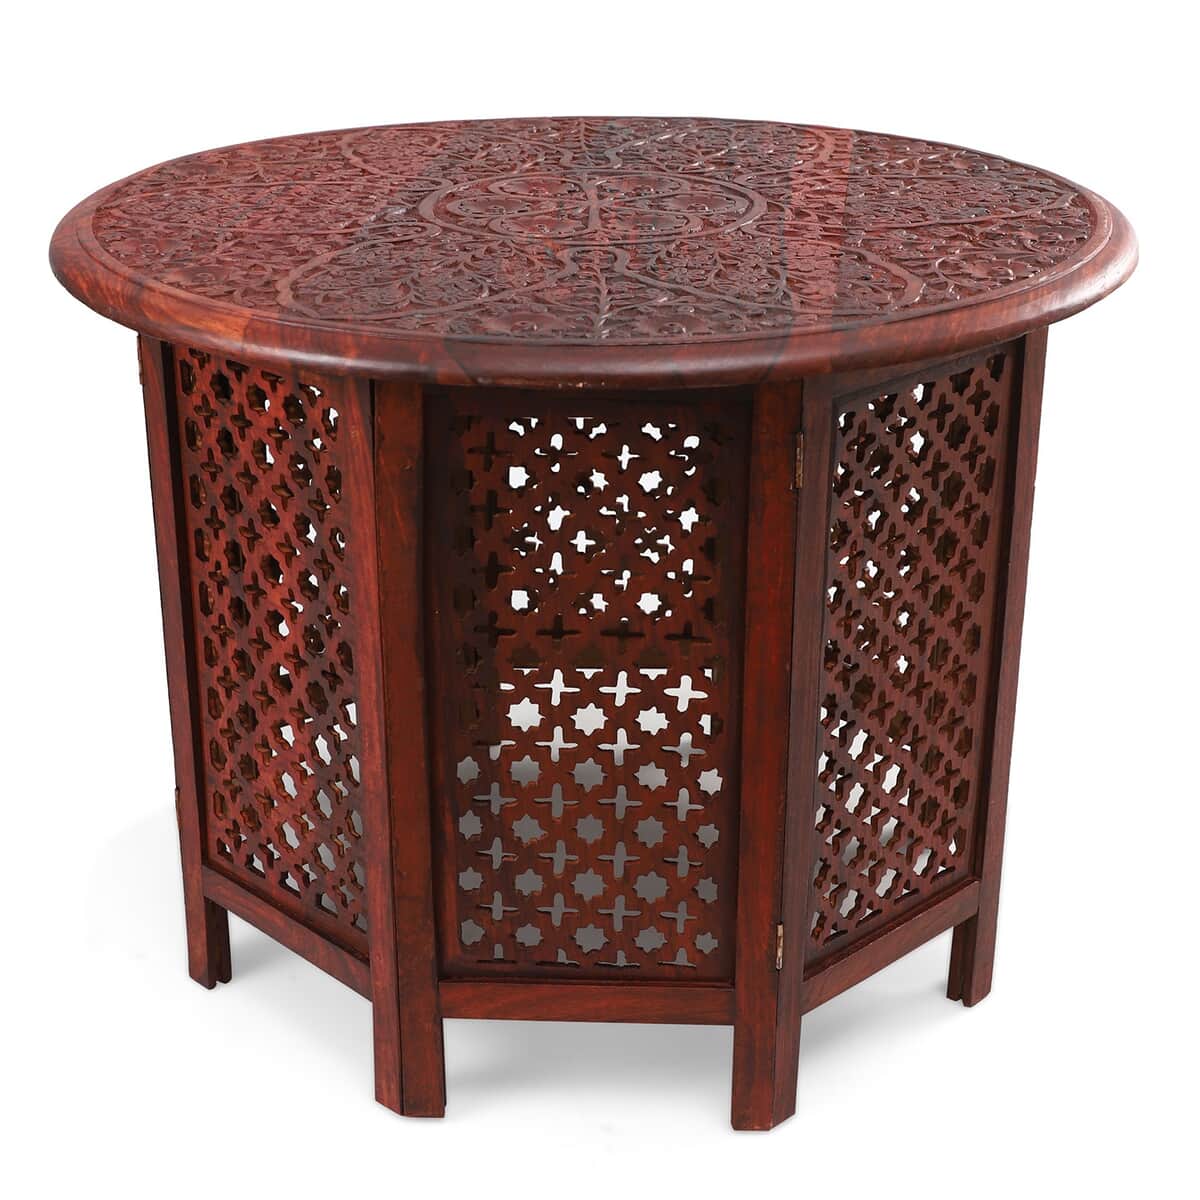 NAKKASHI Handcarved Wooden Table with Round Top Floral & Jali Stand (27"x27"x20") image number 0